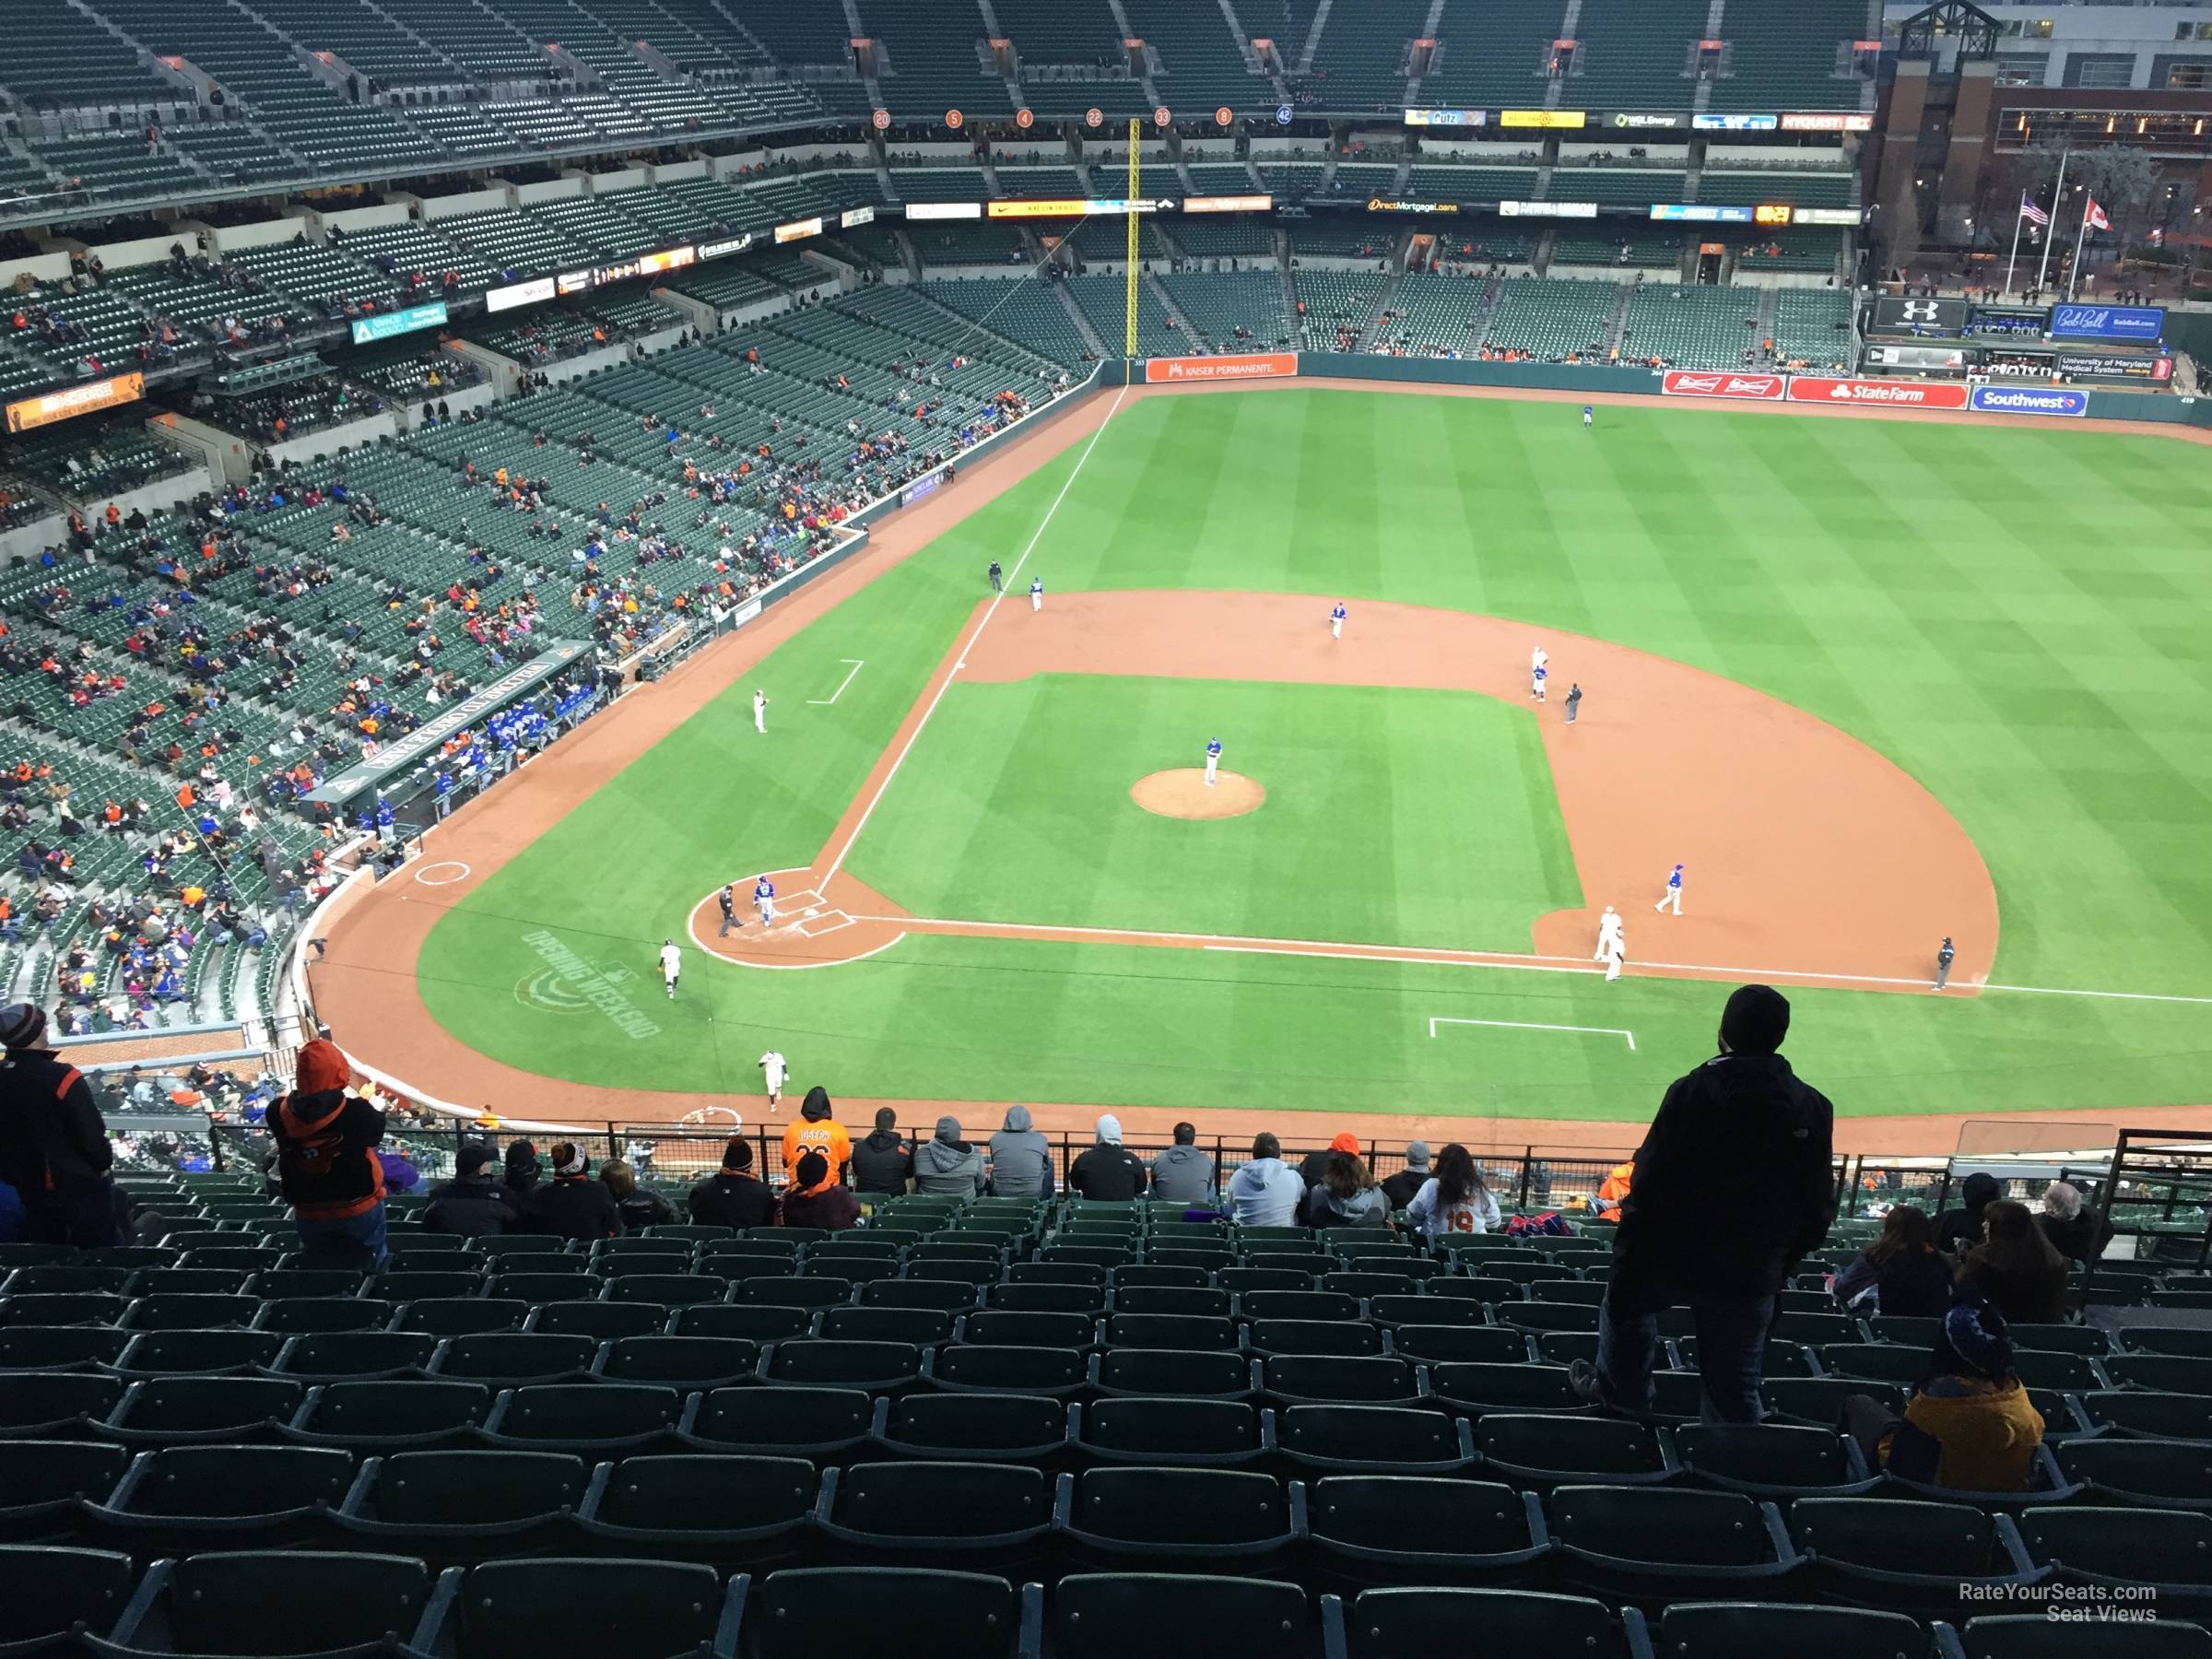 Section 324 at Oriole Park 